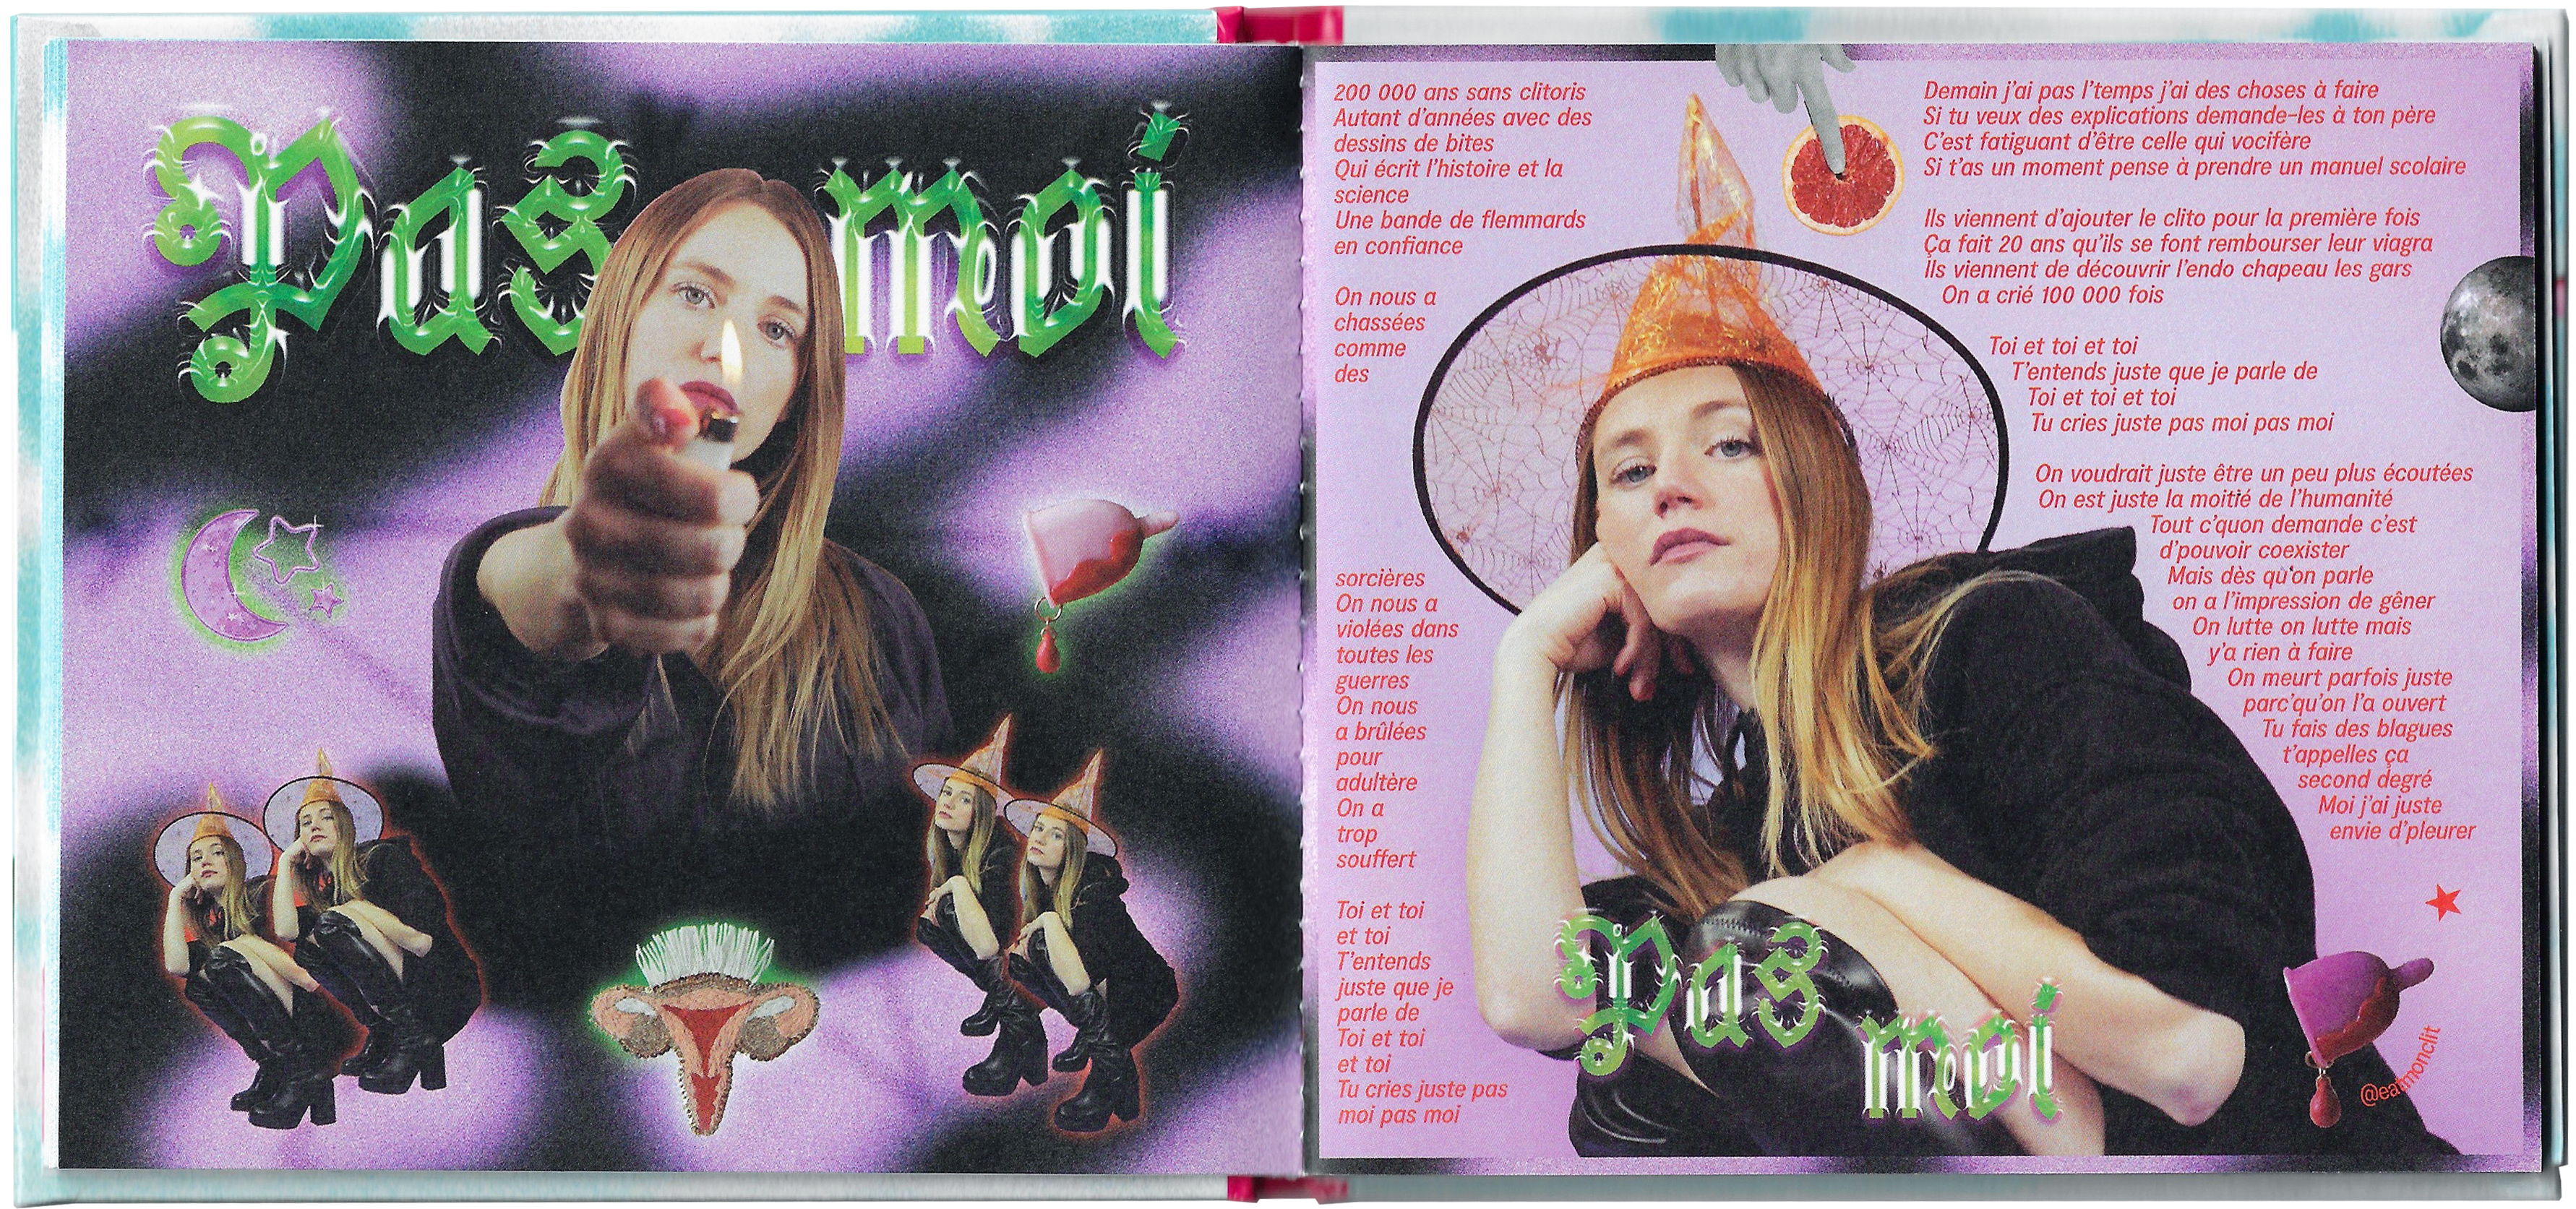 book spread featuring collage, a young woman in witch hat. overlayed gooey green Pas Moi title and song lyrics